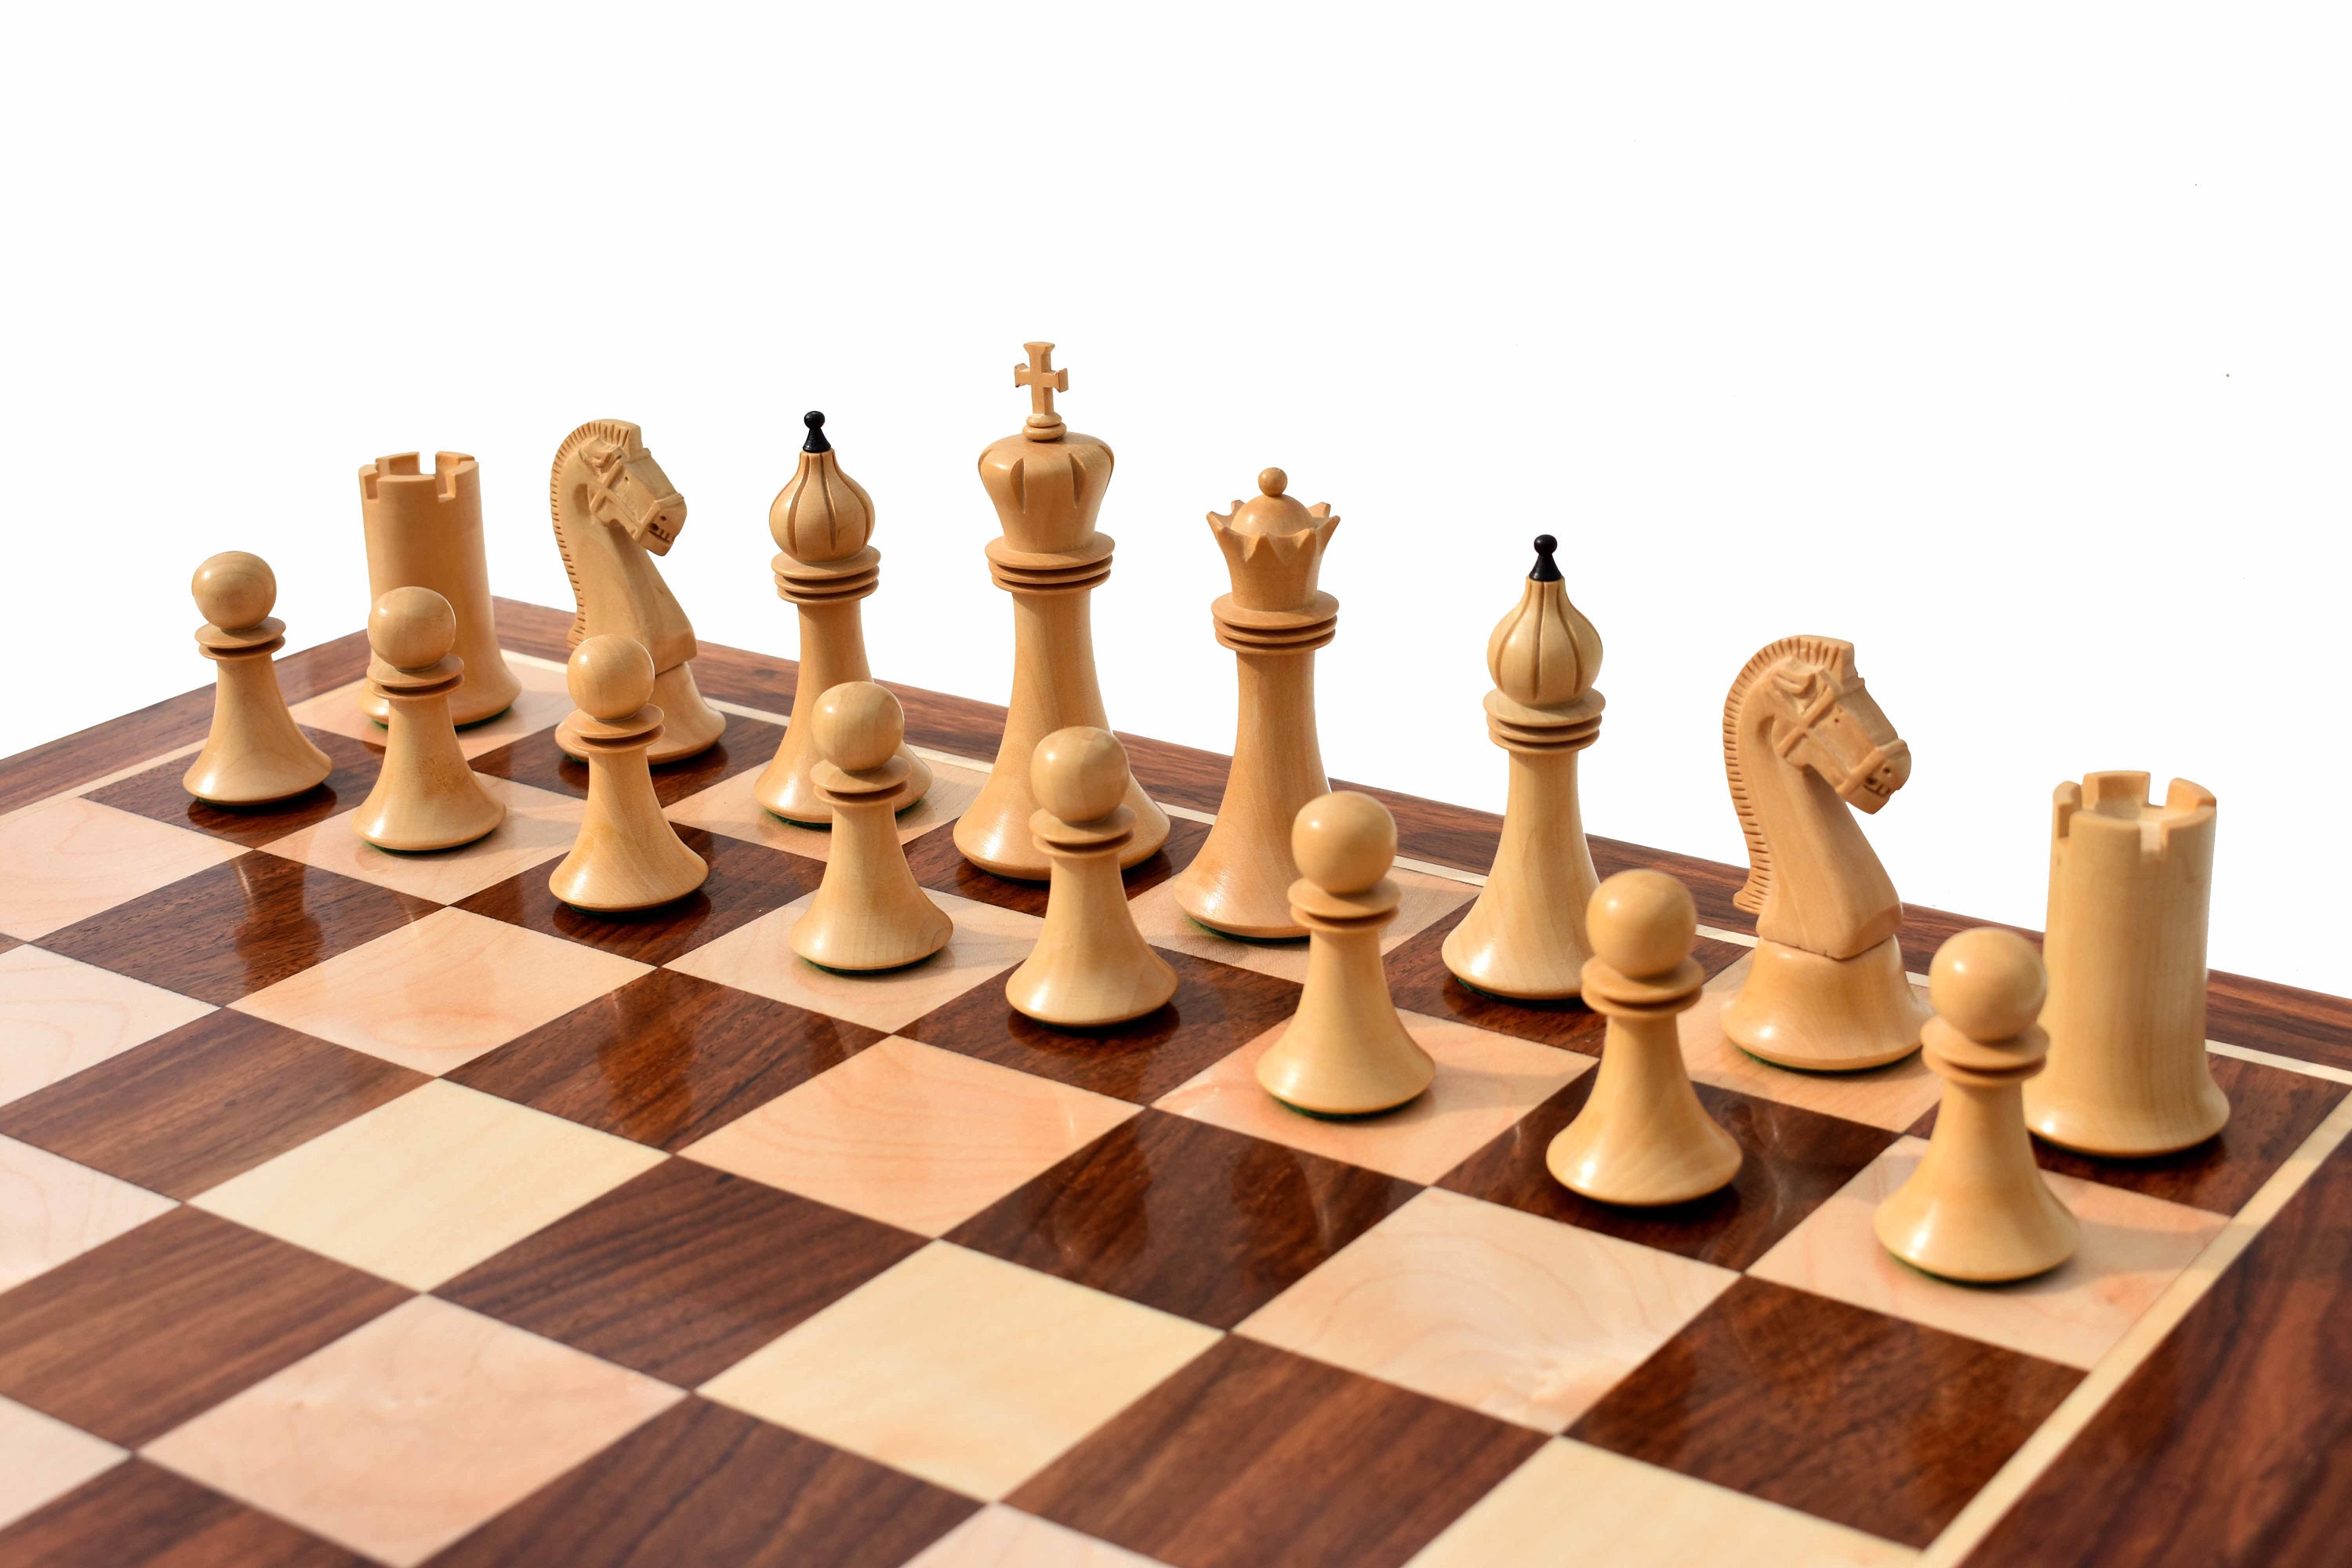 Woodseats Chess Club - The way forward for over the board chess